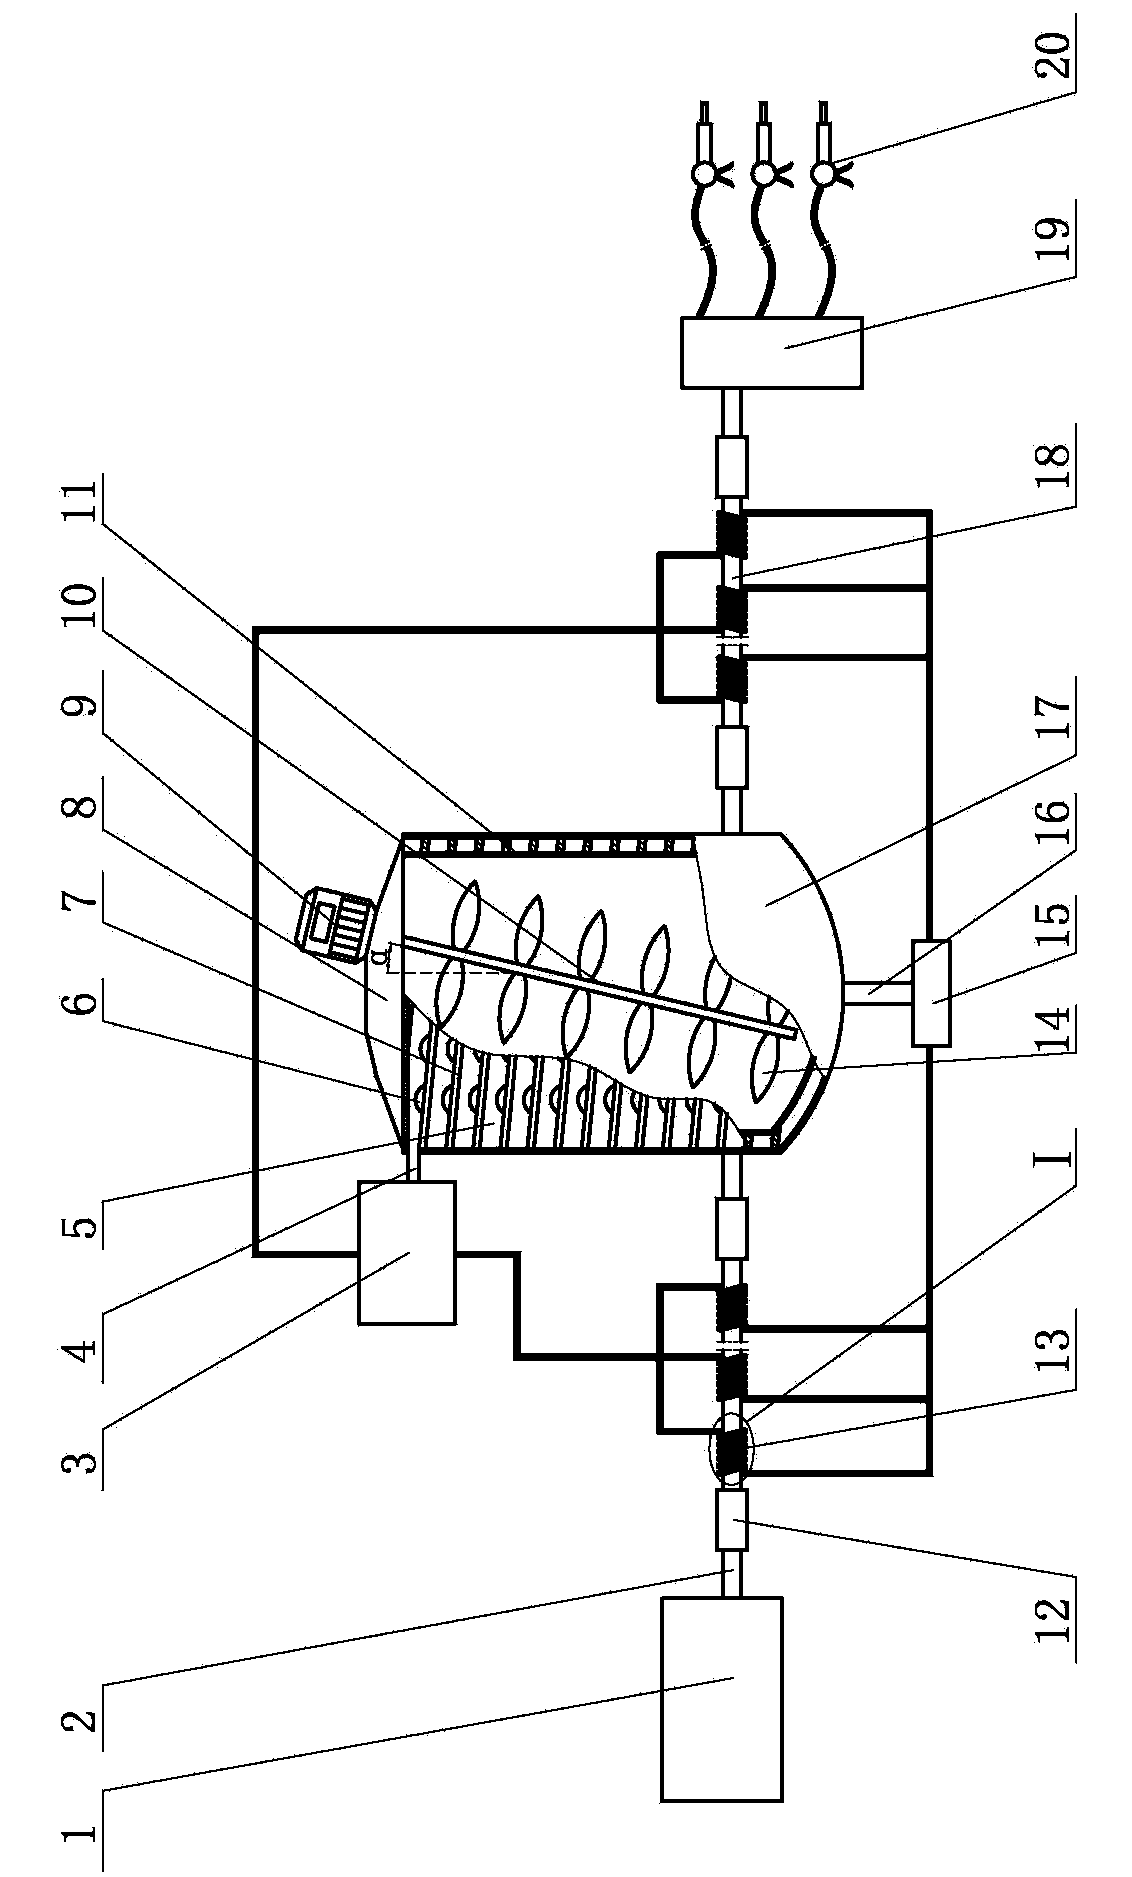 Production system for anti-pollution chemical coating on surface of metal in water